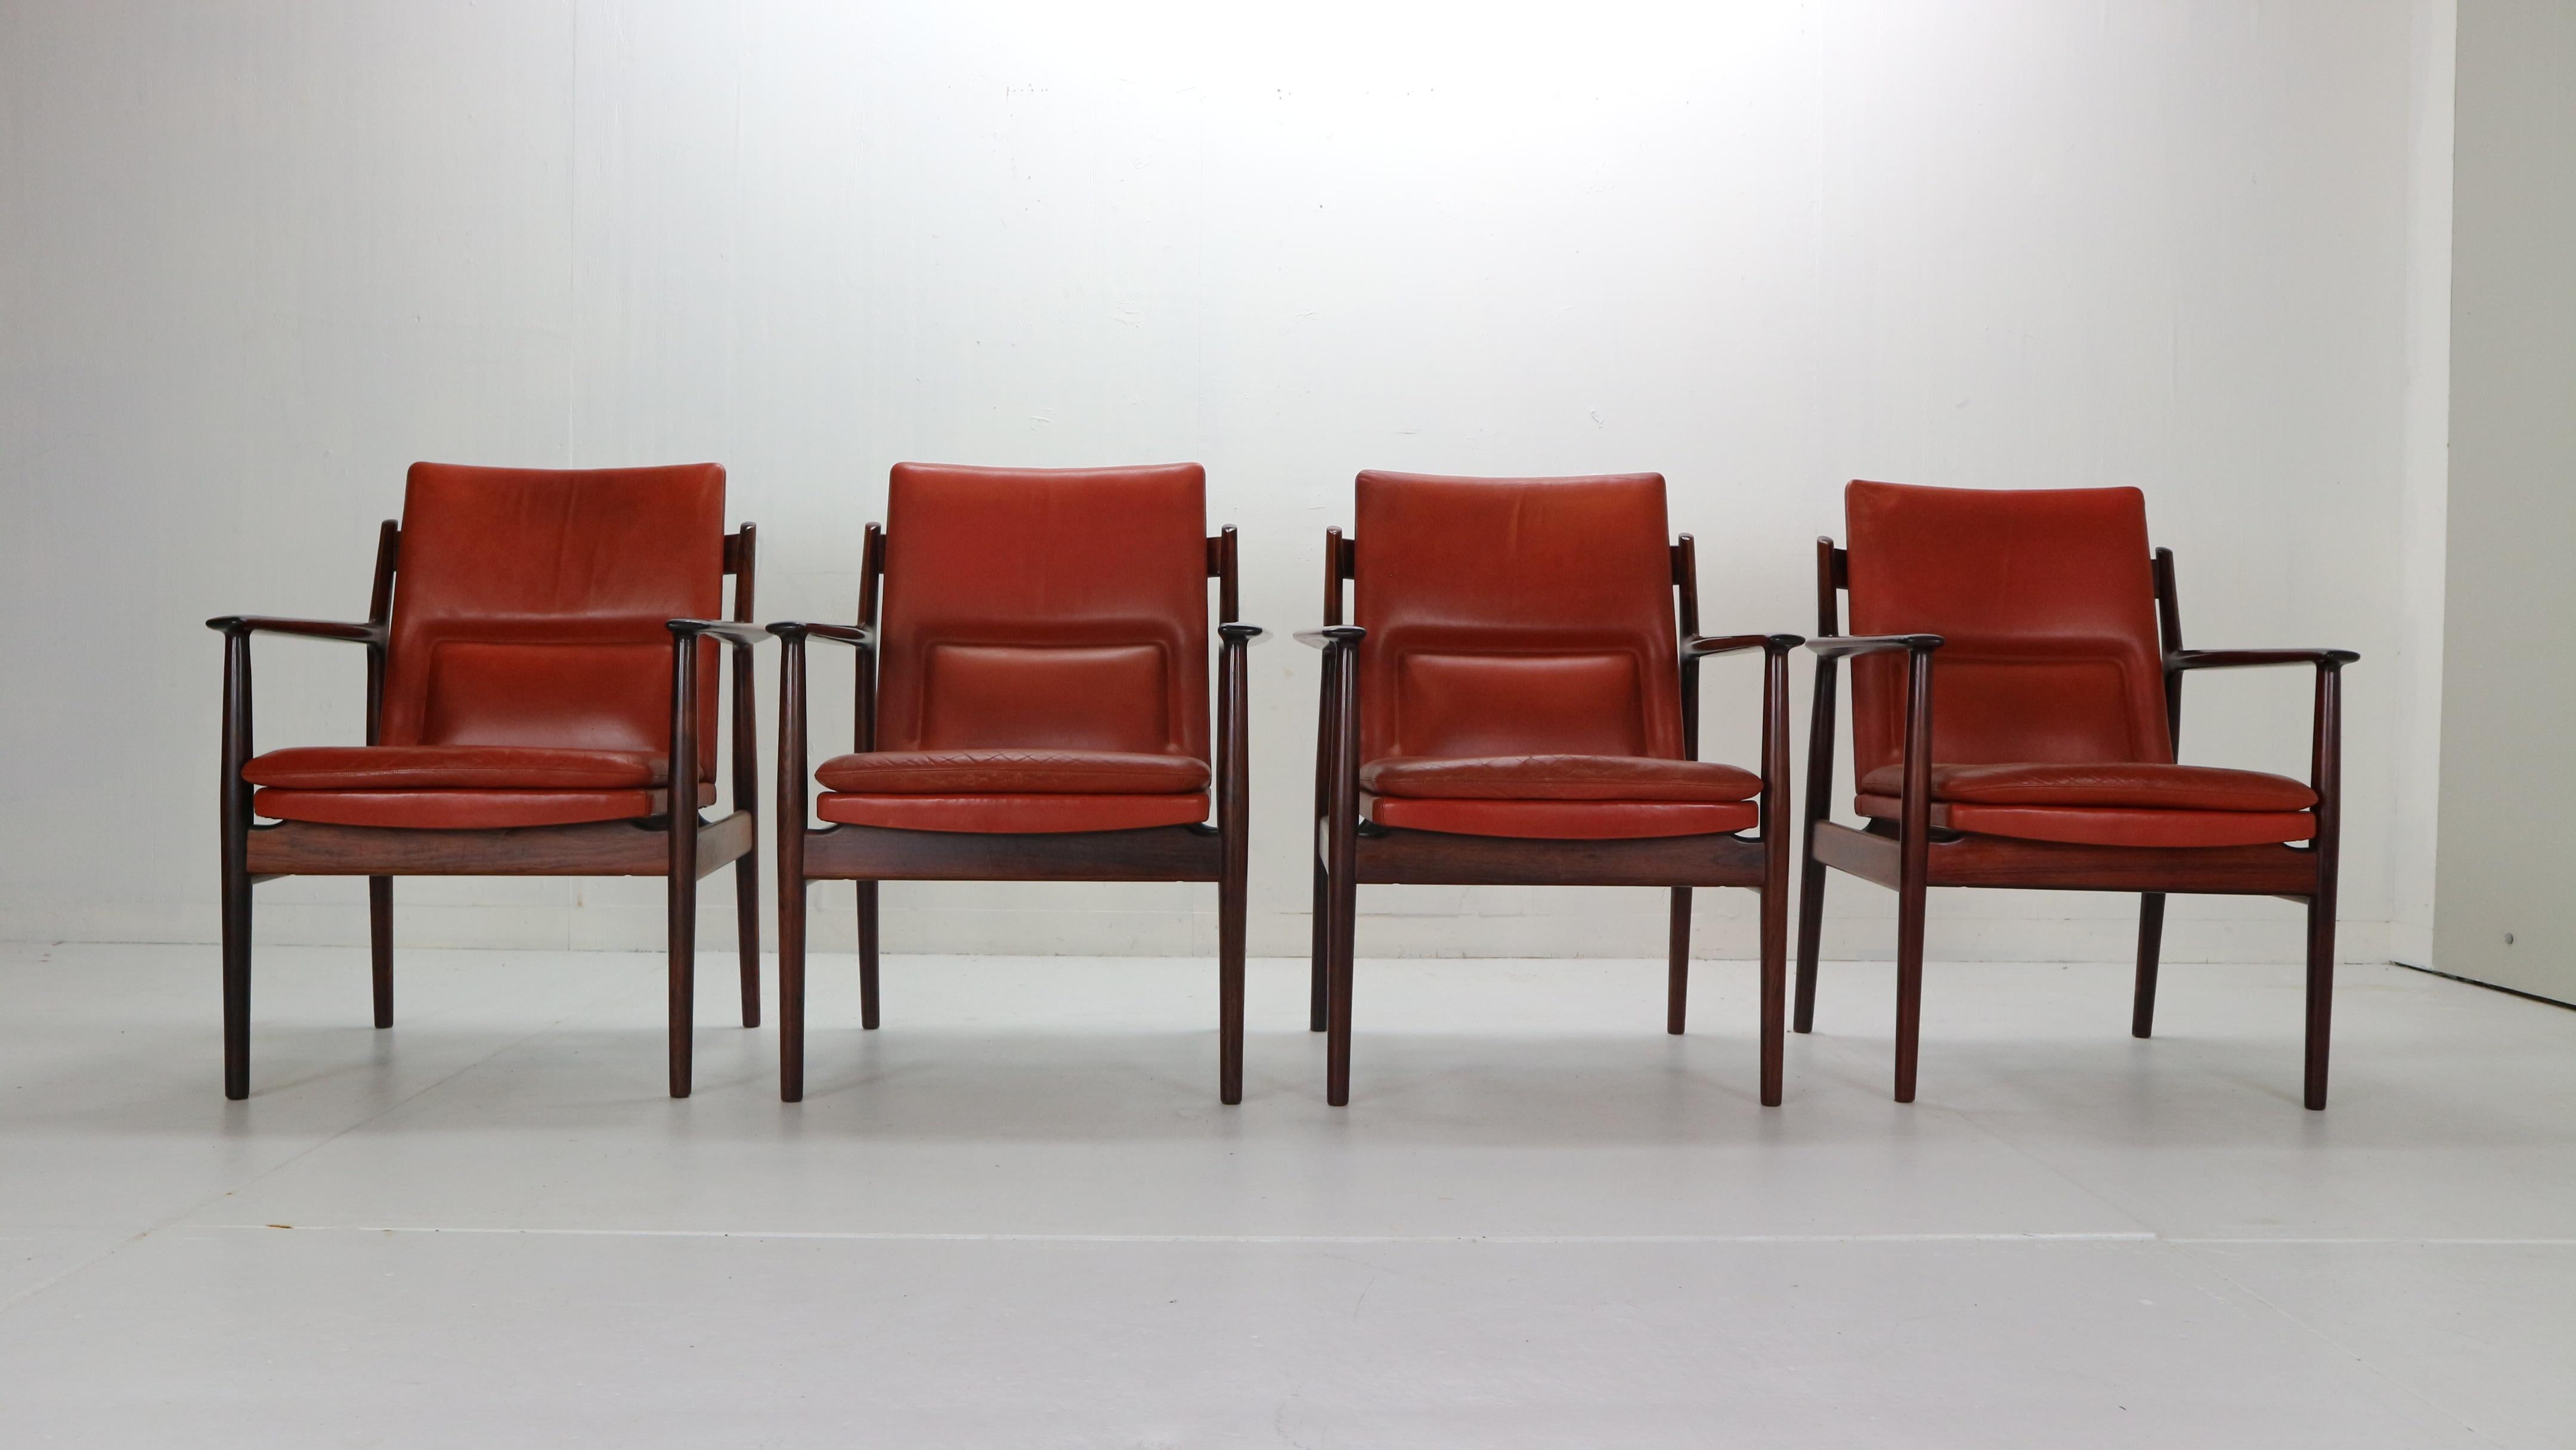 Set of four armchairs designed by Arne Vodder for Sibast manufacture in 1960s period, Denmark.
Mid-Century Modern chairs are in original condition and has an original labels under seatings.
The seating is made of red leather and has a beautiful